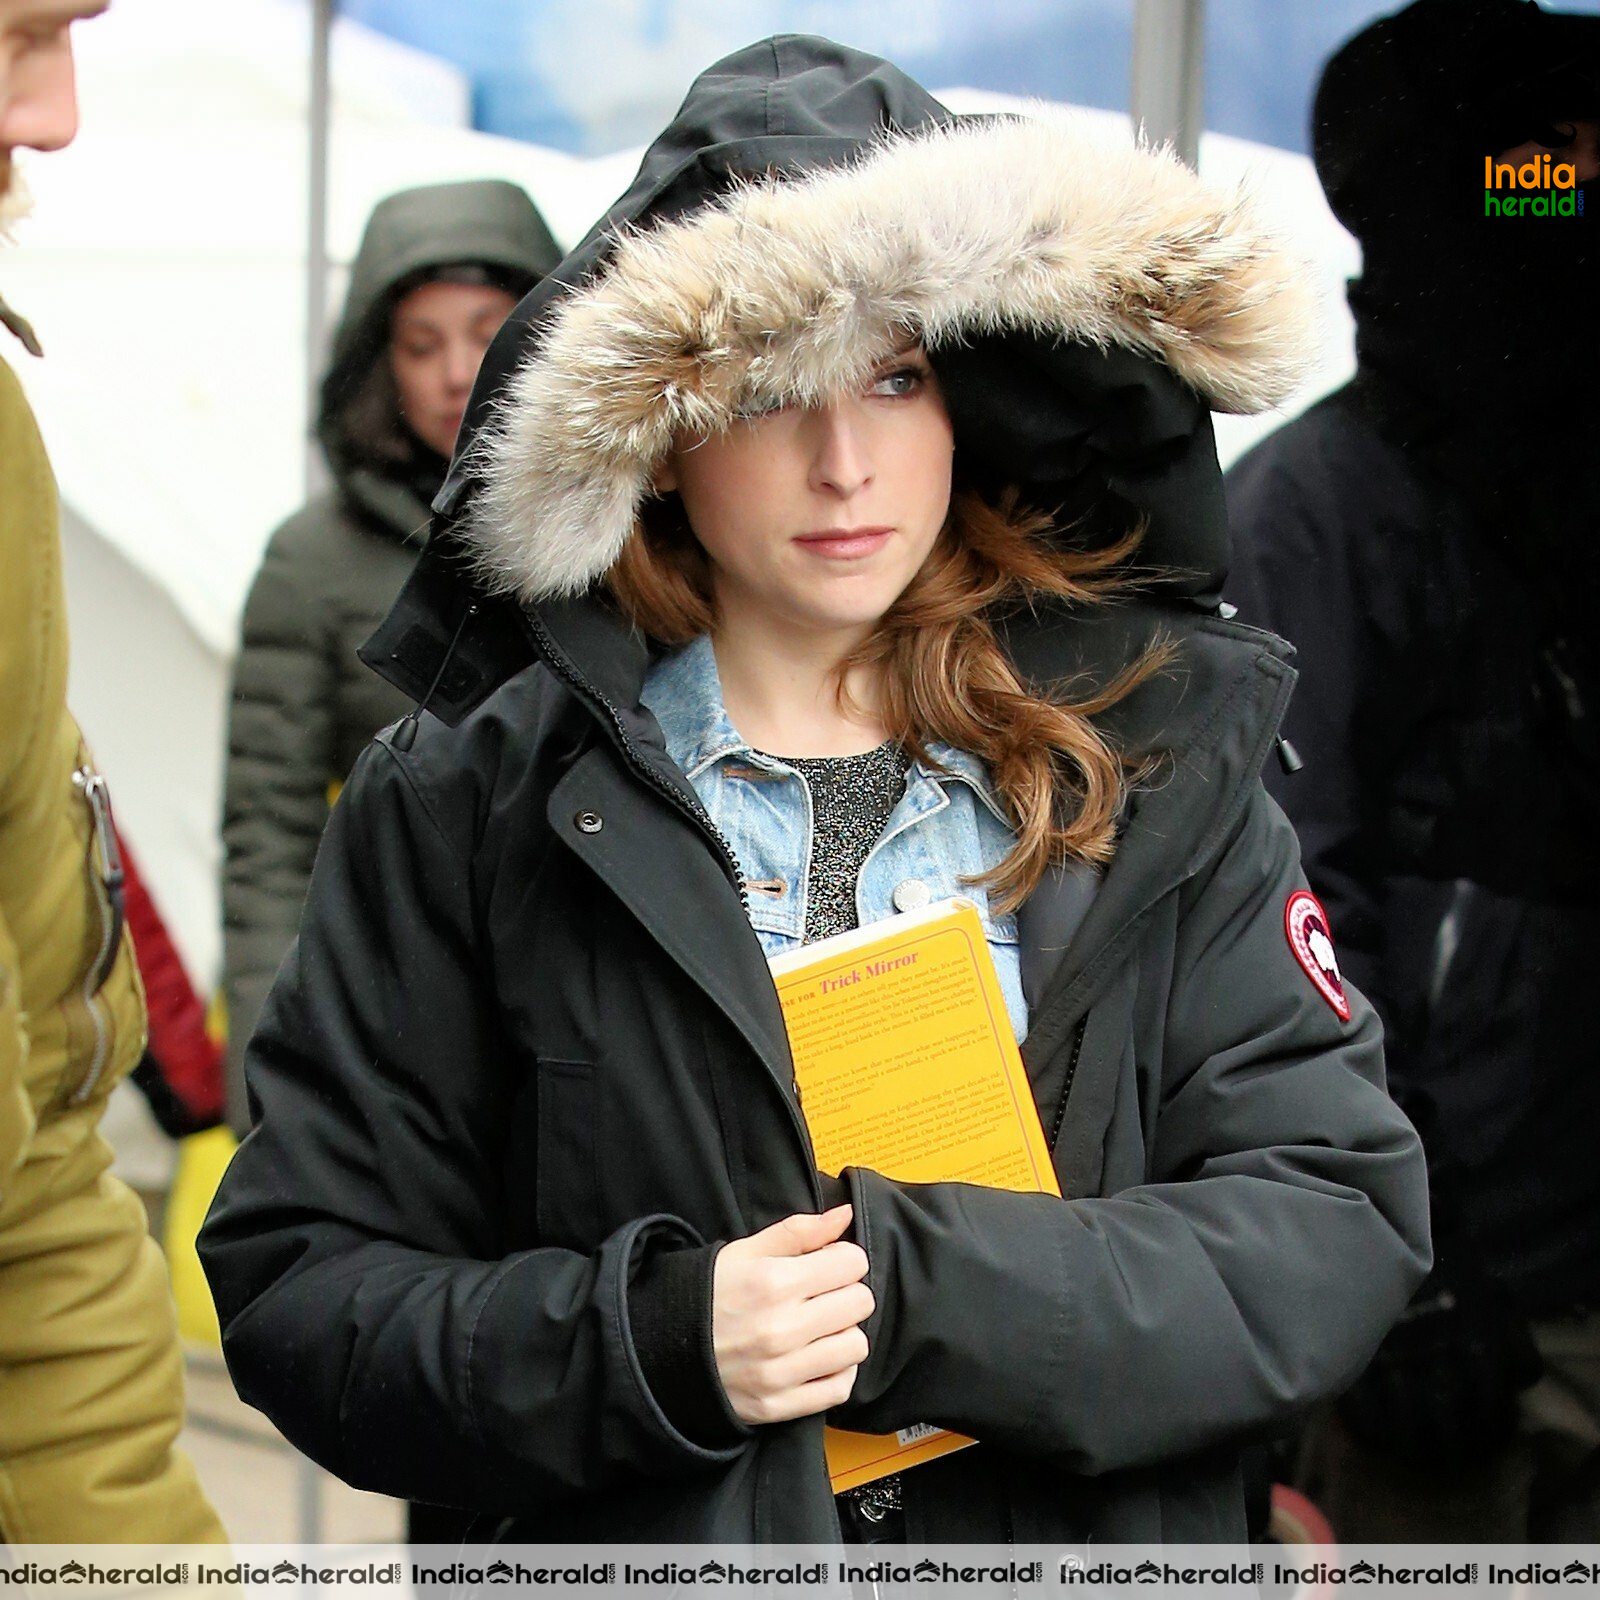 Anna Kendrick On the sets of Love Life in New York City